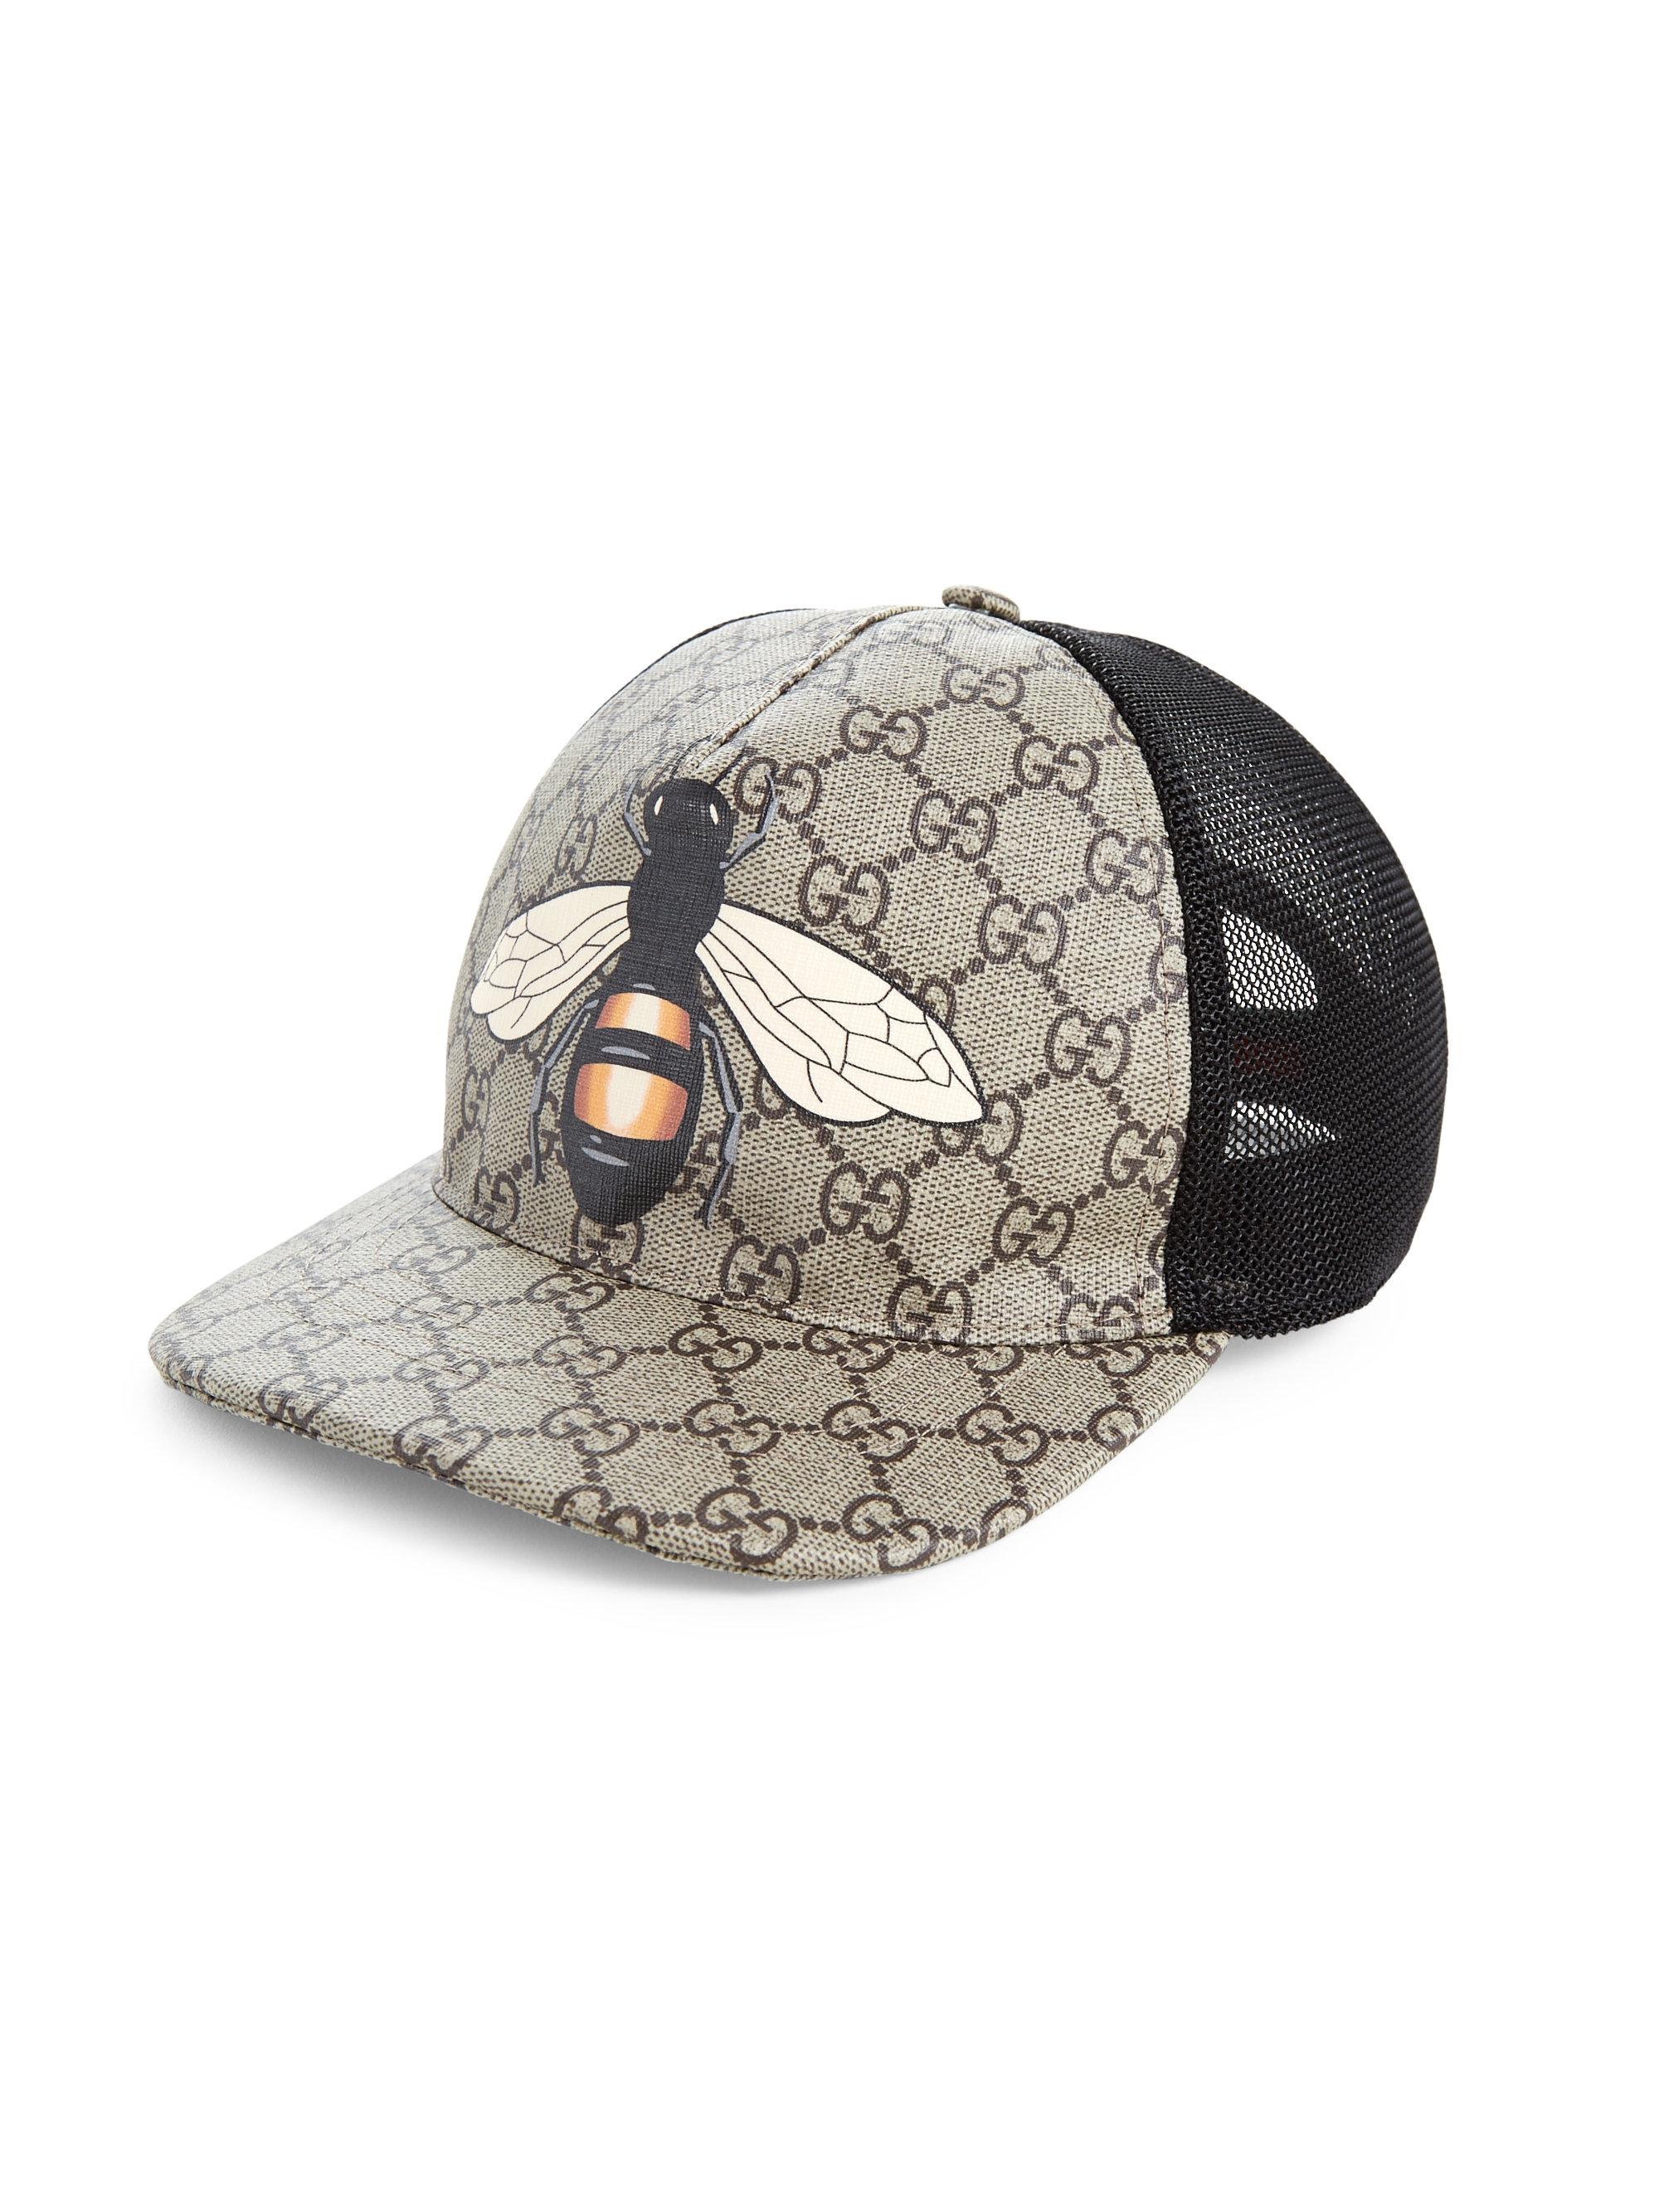 Gucci Canvas Bee Cap in Beige (Natural) for Men - Lyst